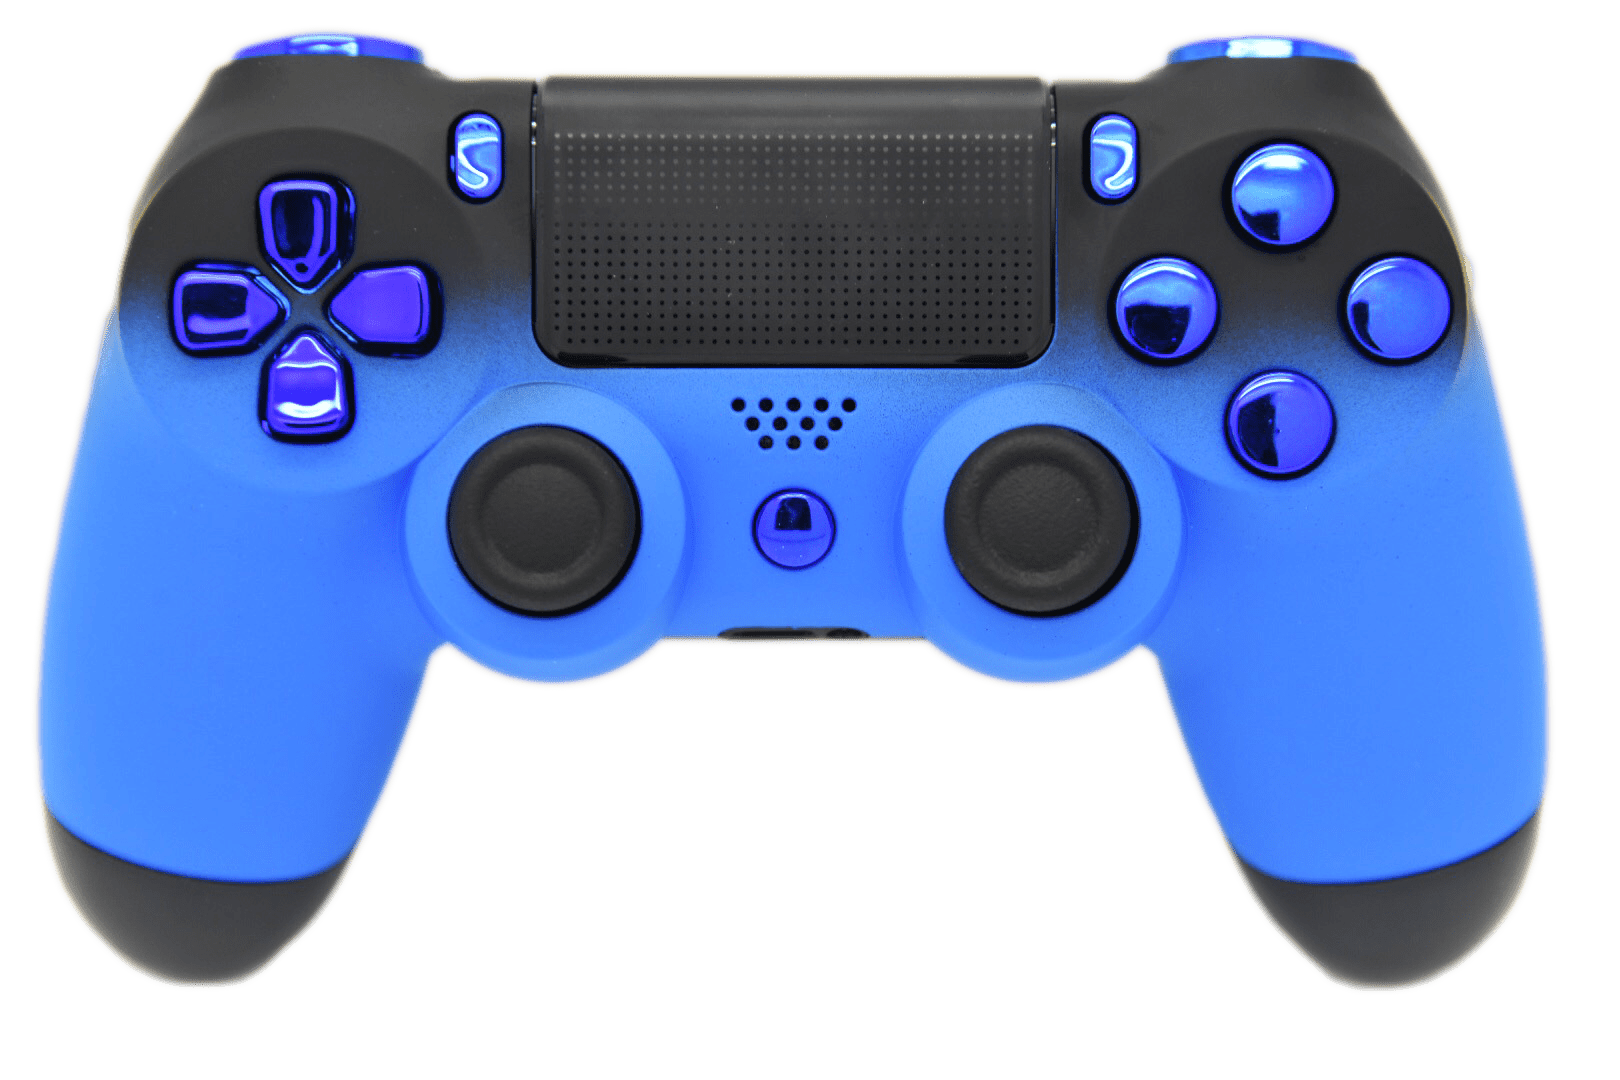 custom painted ps4 controller